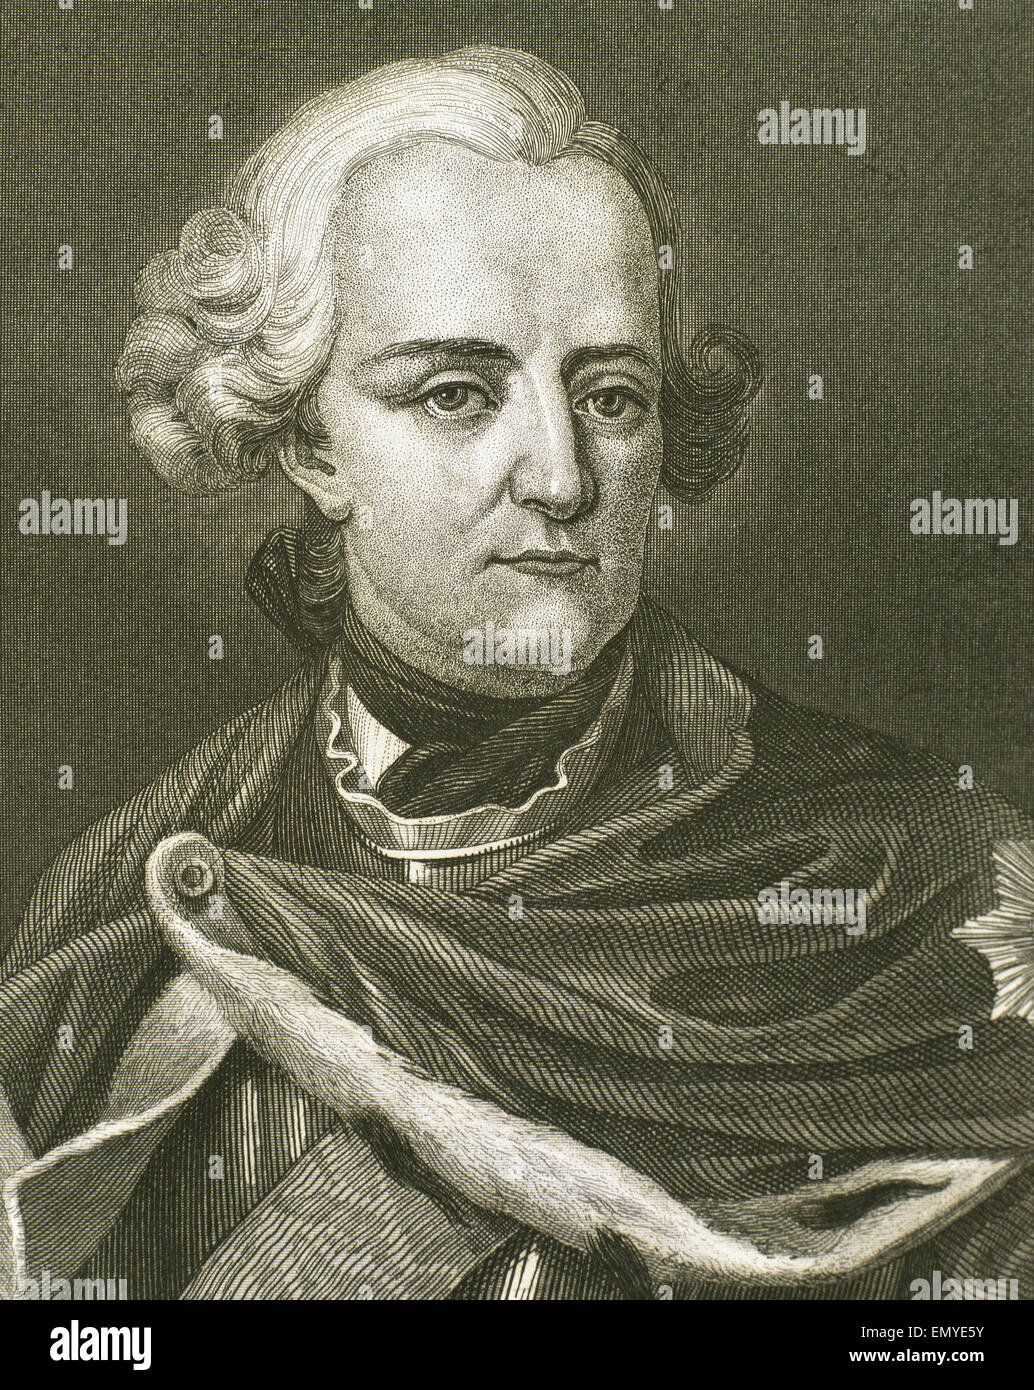 Frederick II the Great (1712-1786).  King of Prusian and Elector of Brandenburg. House of Hohenzolern. Portrait. Engraving. 19th century. Stock Photo